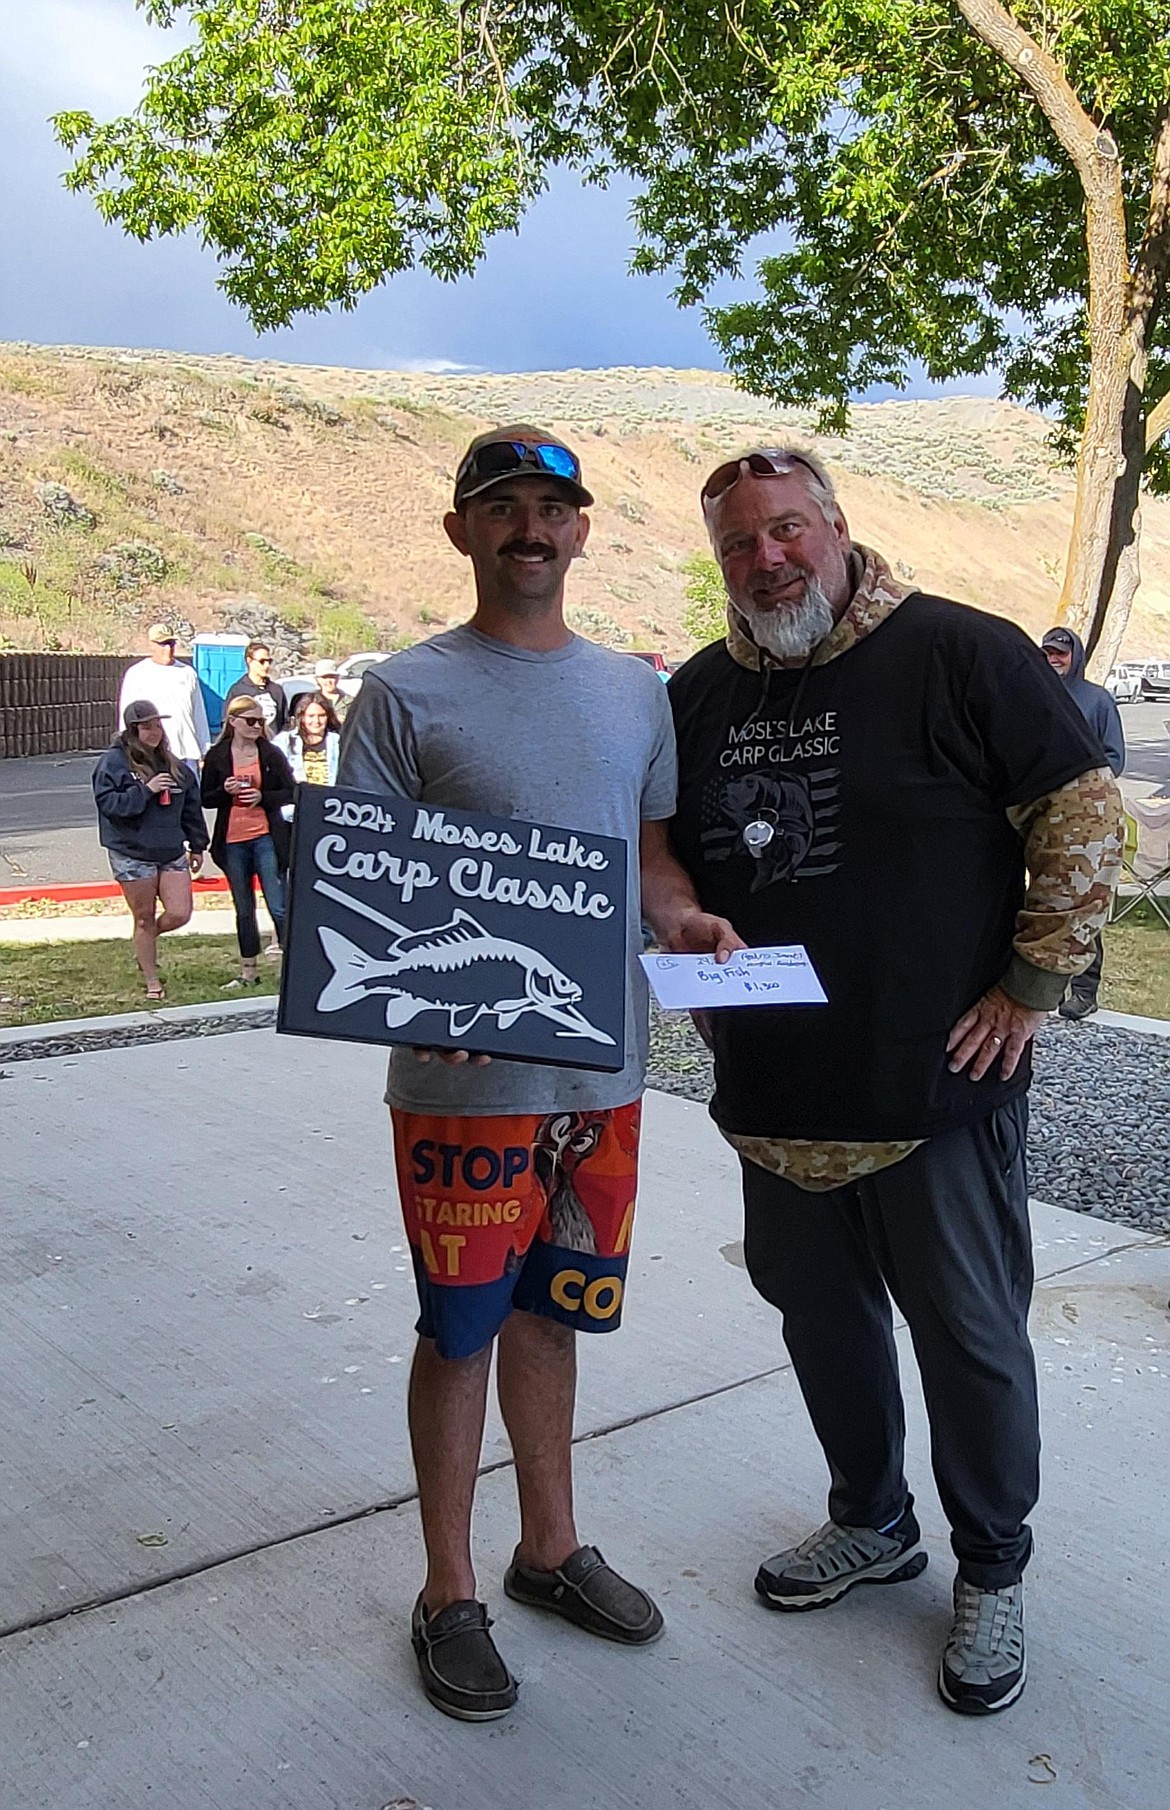 Austin Rosbrough, left, and Pedro Jimenez teamed up to catch the biggest fish at the 2024 Moses Lake Carp Classic. Ty Swartout, right, presented the award.